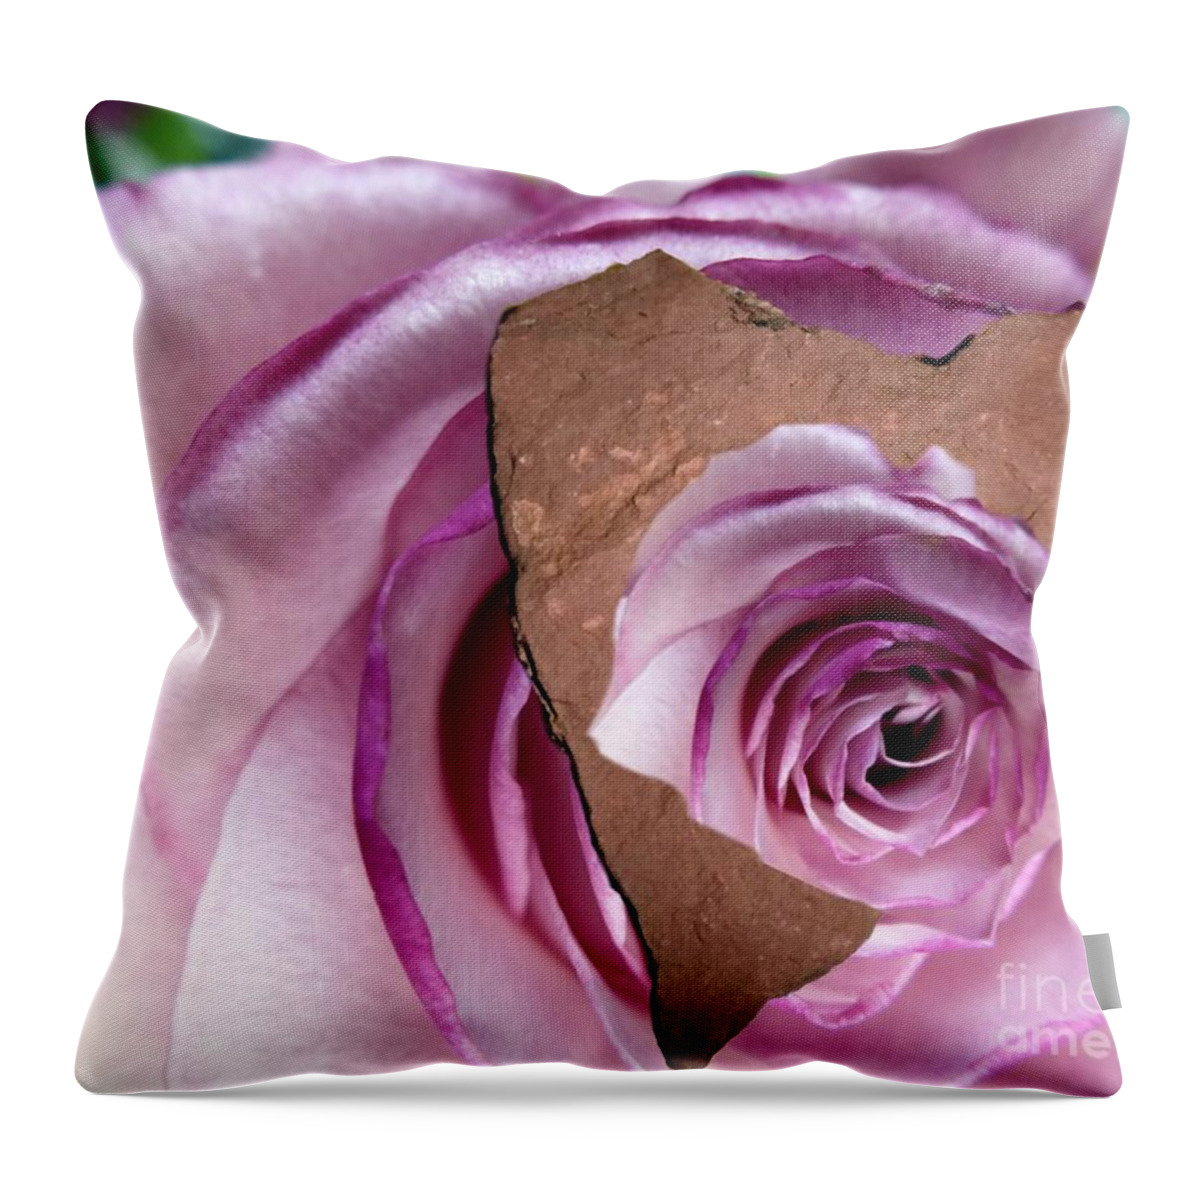 Rose Throw Pillow featuring the photograph Heart Rock Neptune Rose by Mars Besso